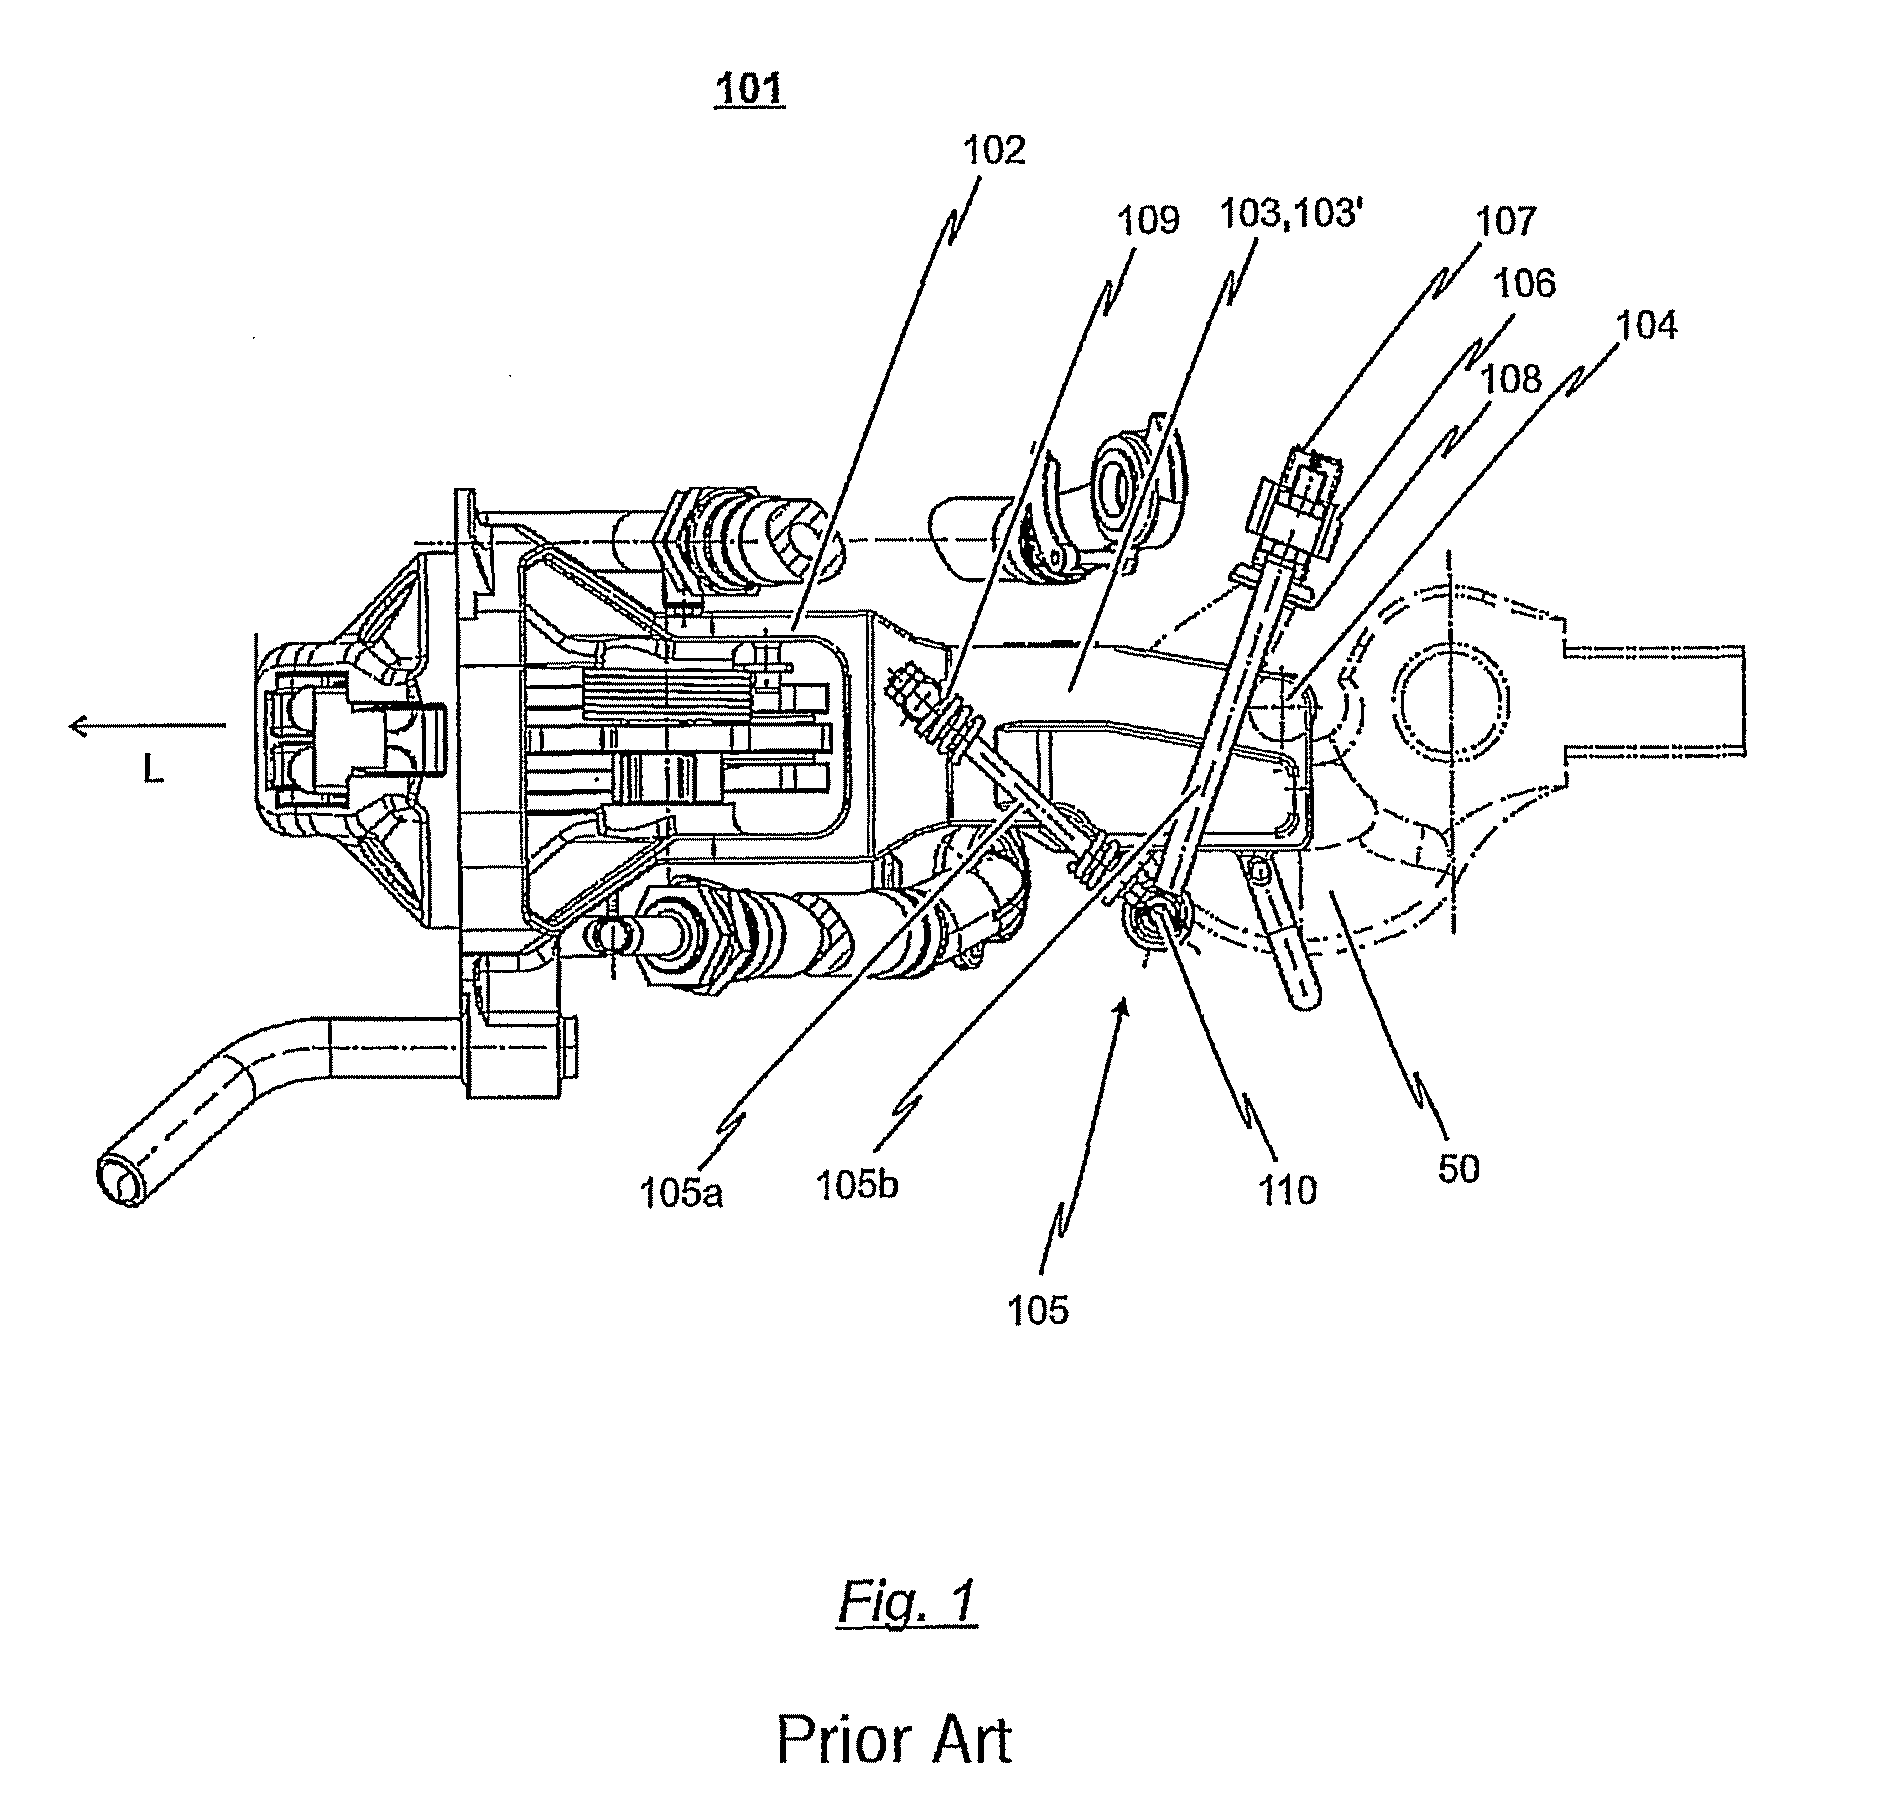 Adapter coupler for adapting couplings of different design